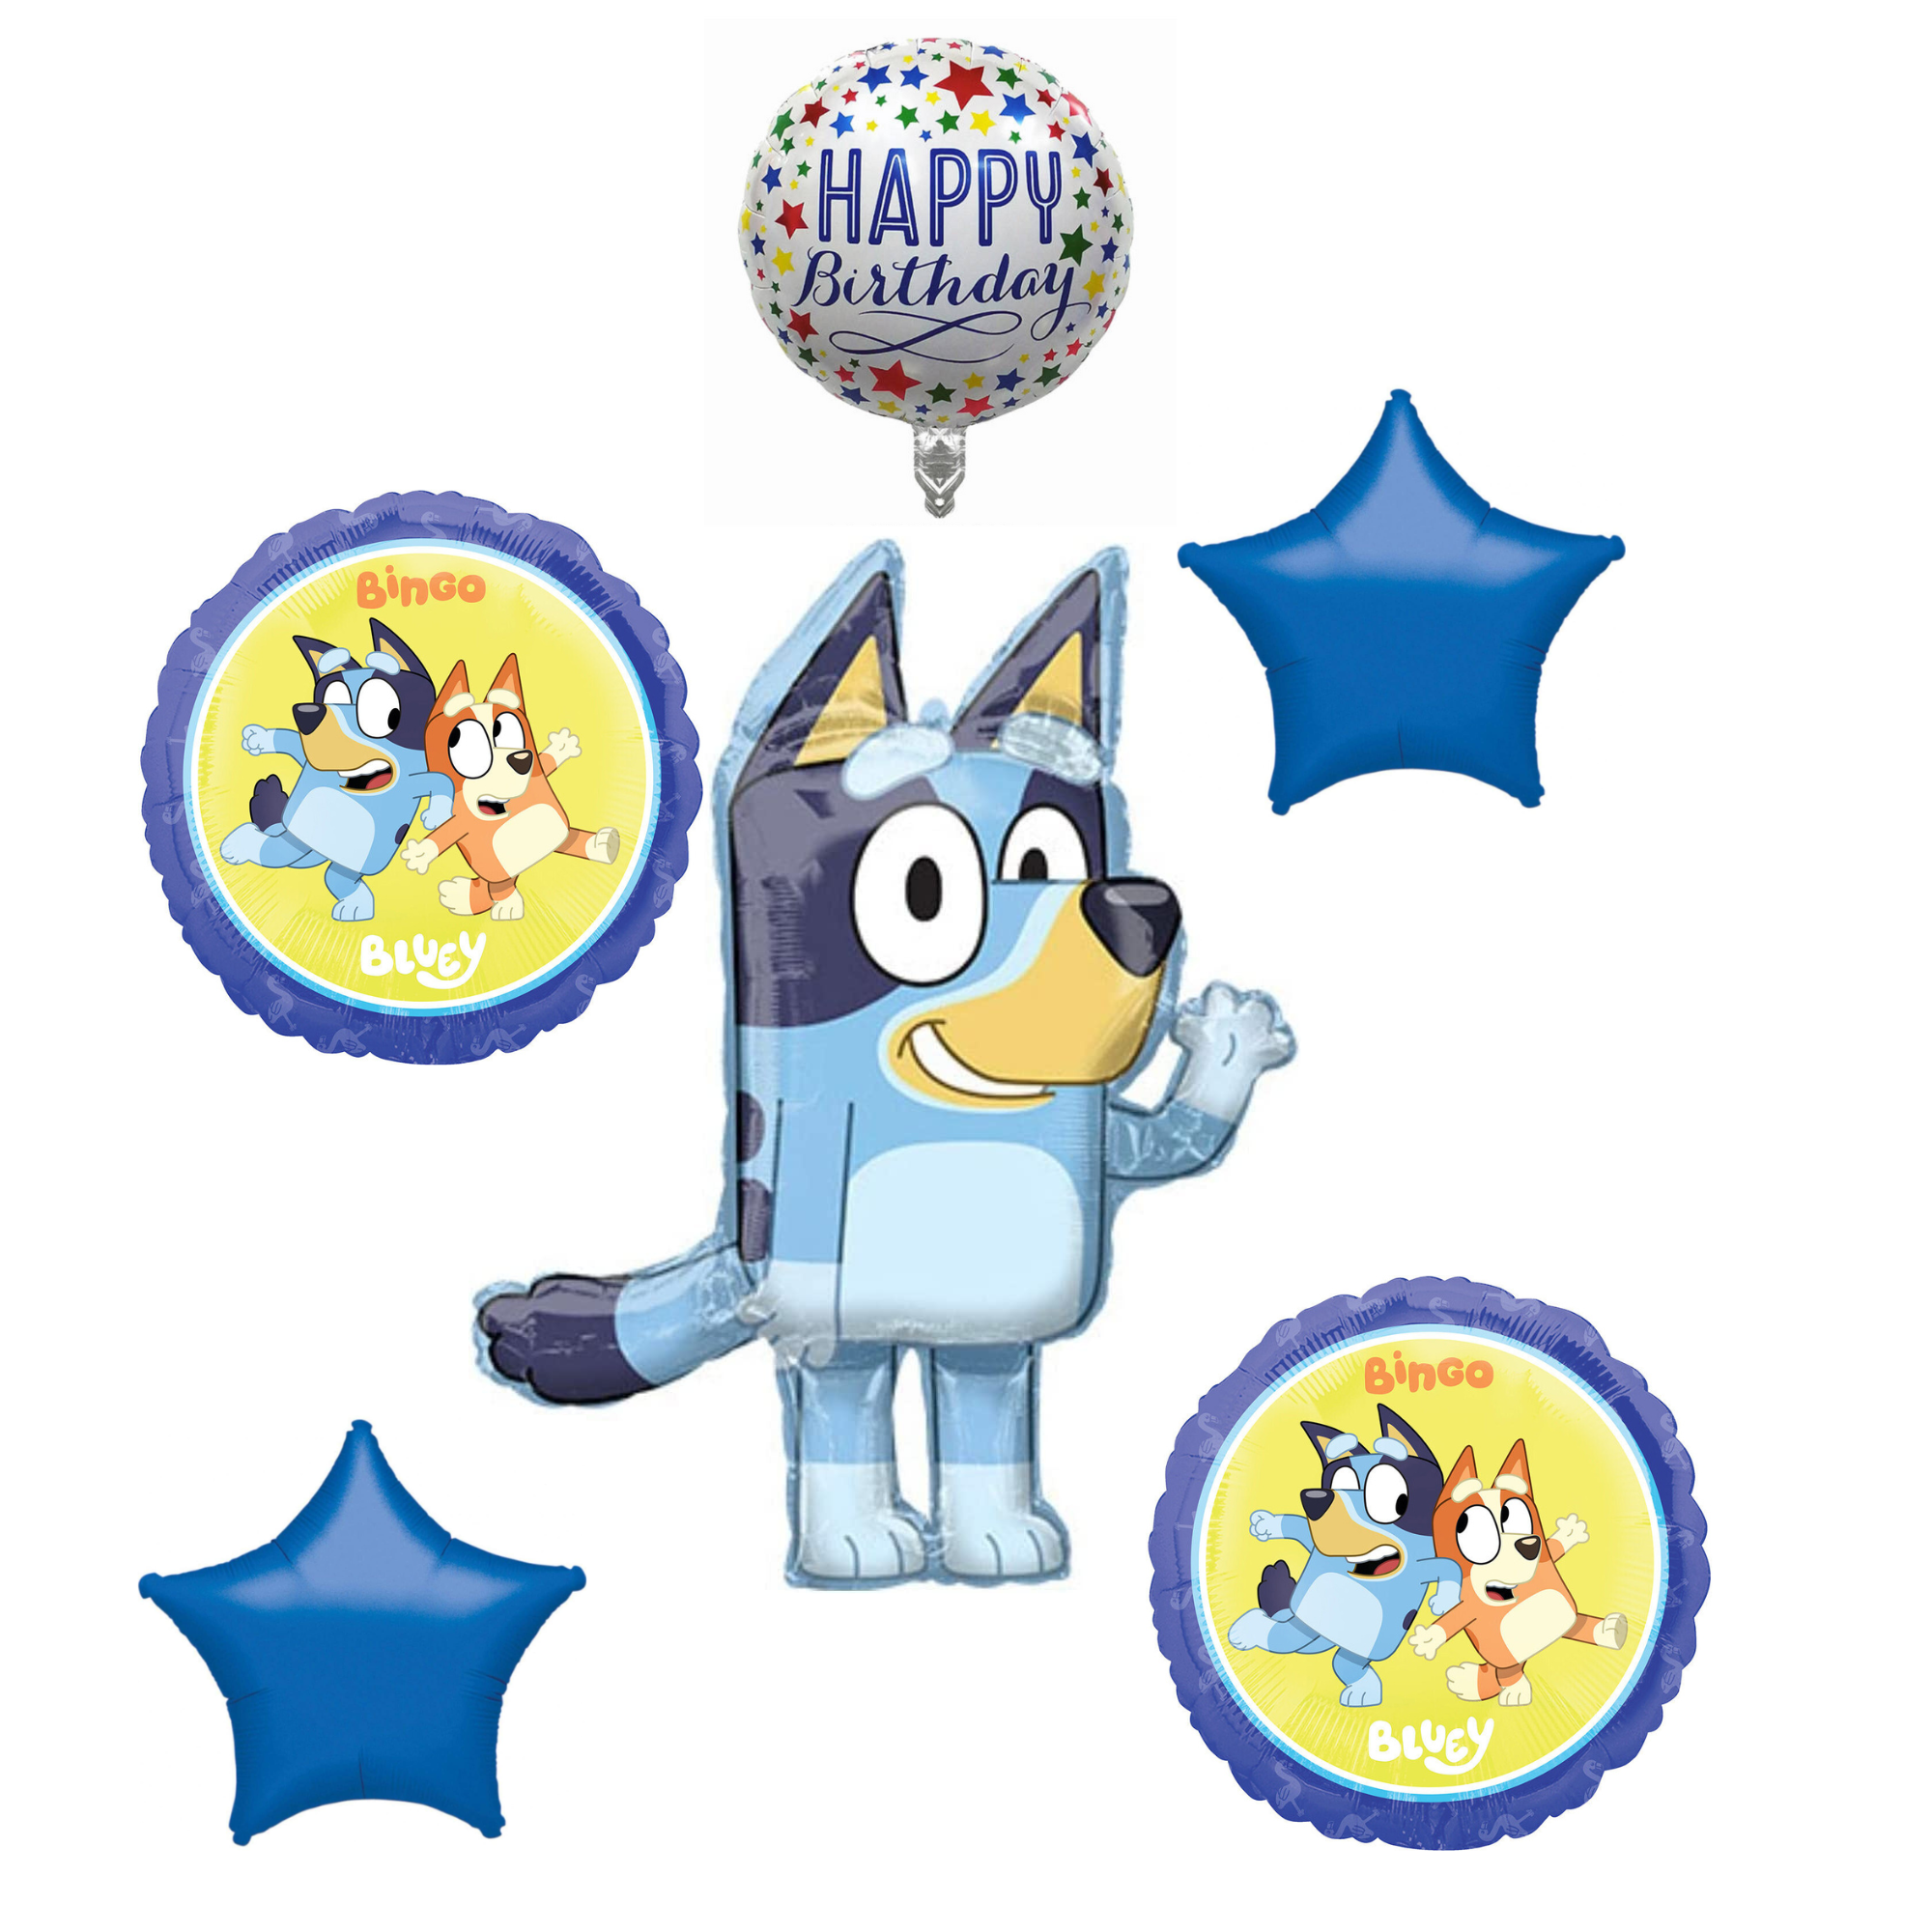 Anagram Bluey Bingo Balloons - Bluey Birthday Party Supplies Balloon Bouquet Decorations Pack of 6